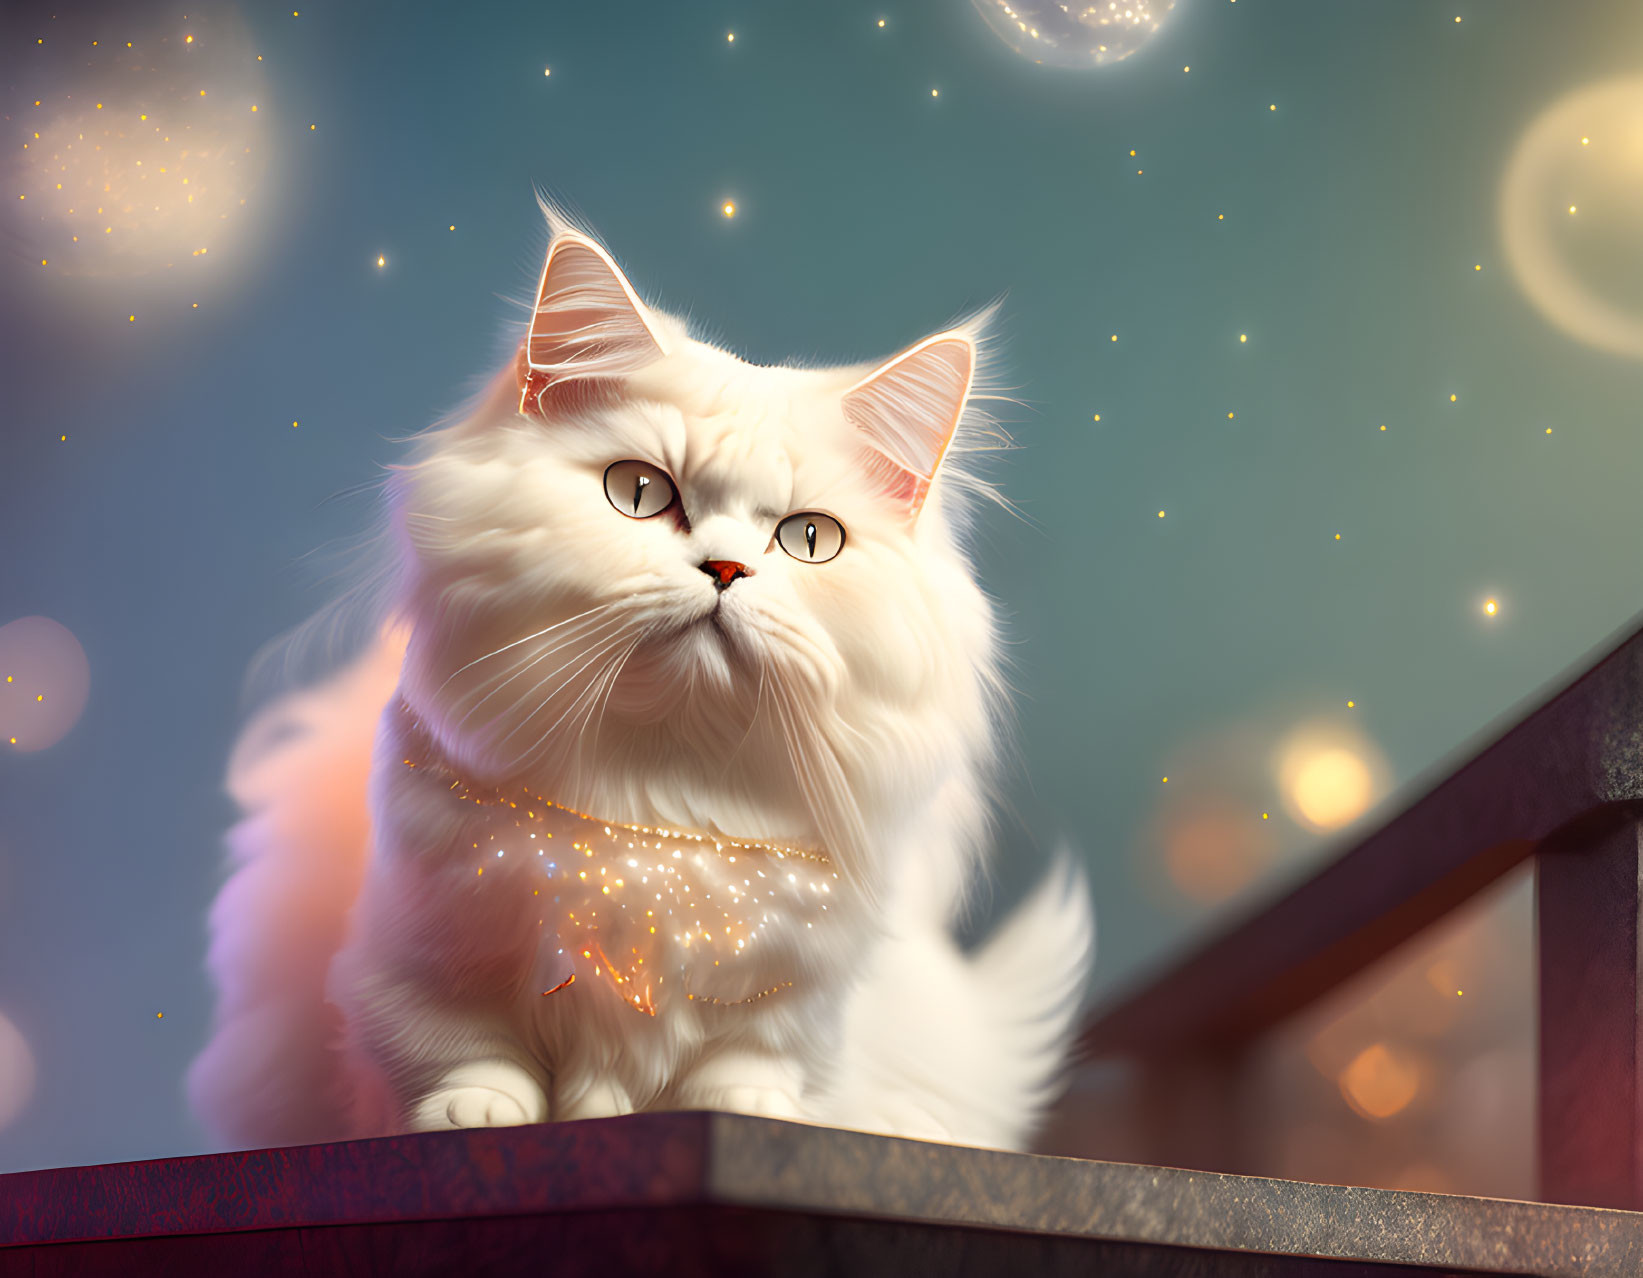 White fluffy cat with starry collar under magical night sky